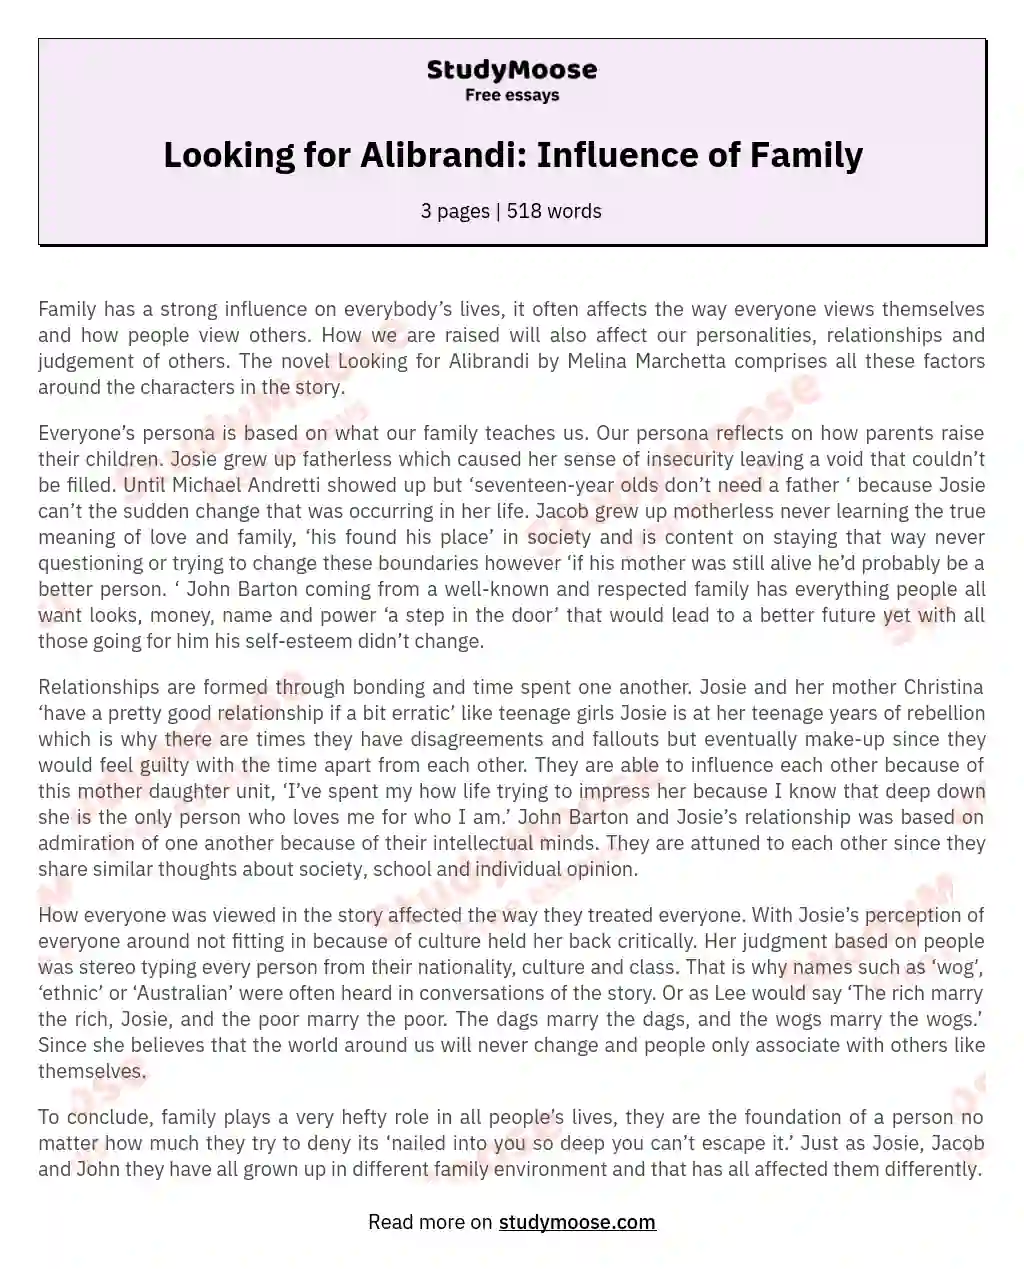 Looking for Alibrandi: Influence of Family essay